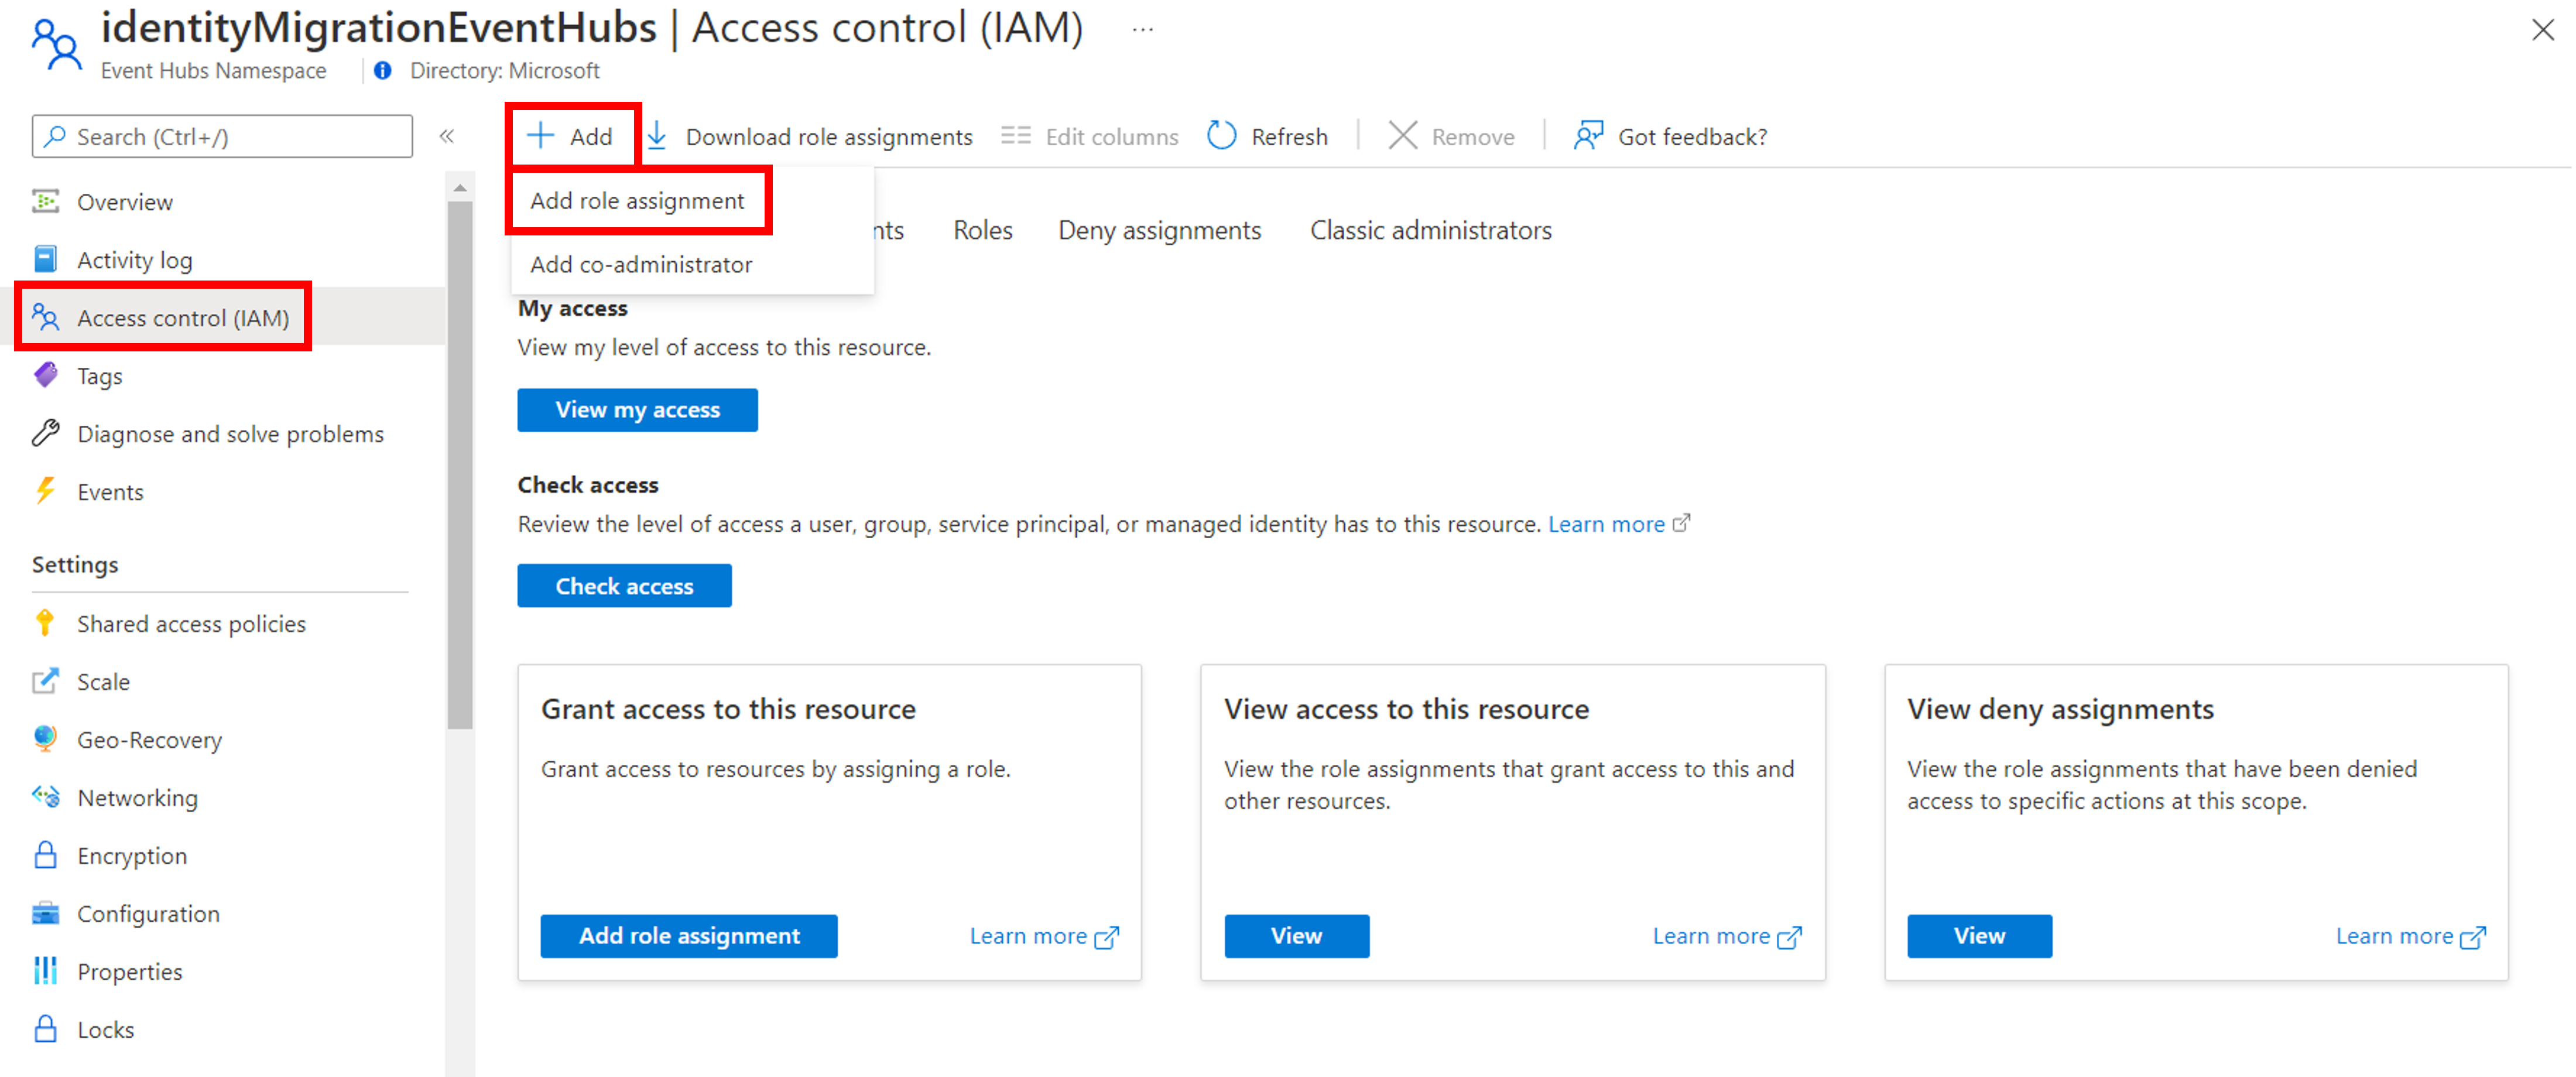 Screenshot of Azure portal Access control (IAM) page of Event Hubs Namespace resource with Add role assignment menu option highlighted.